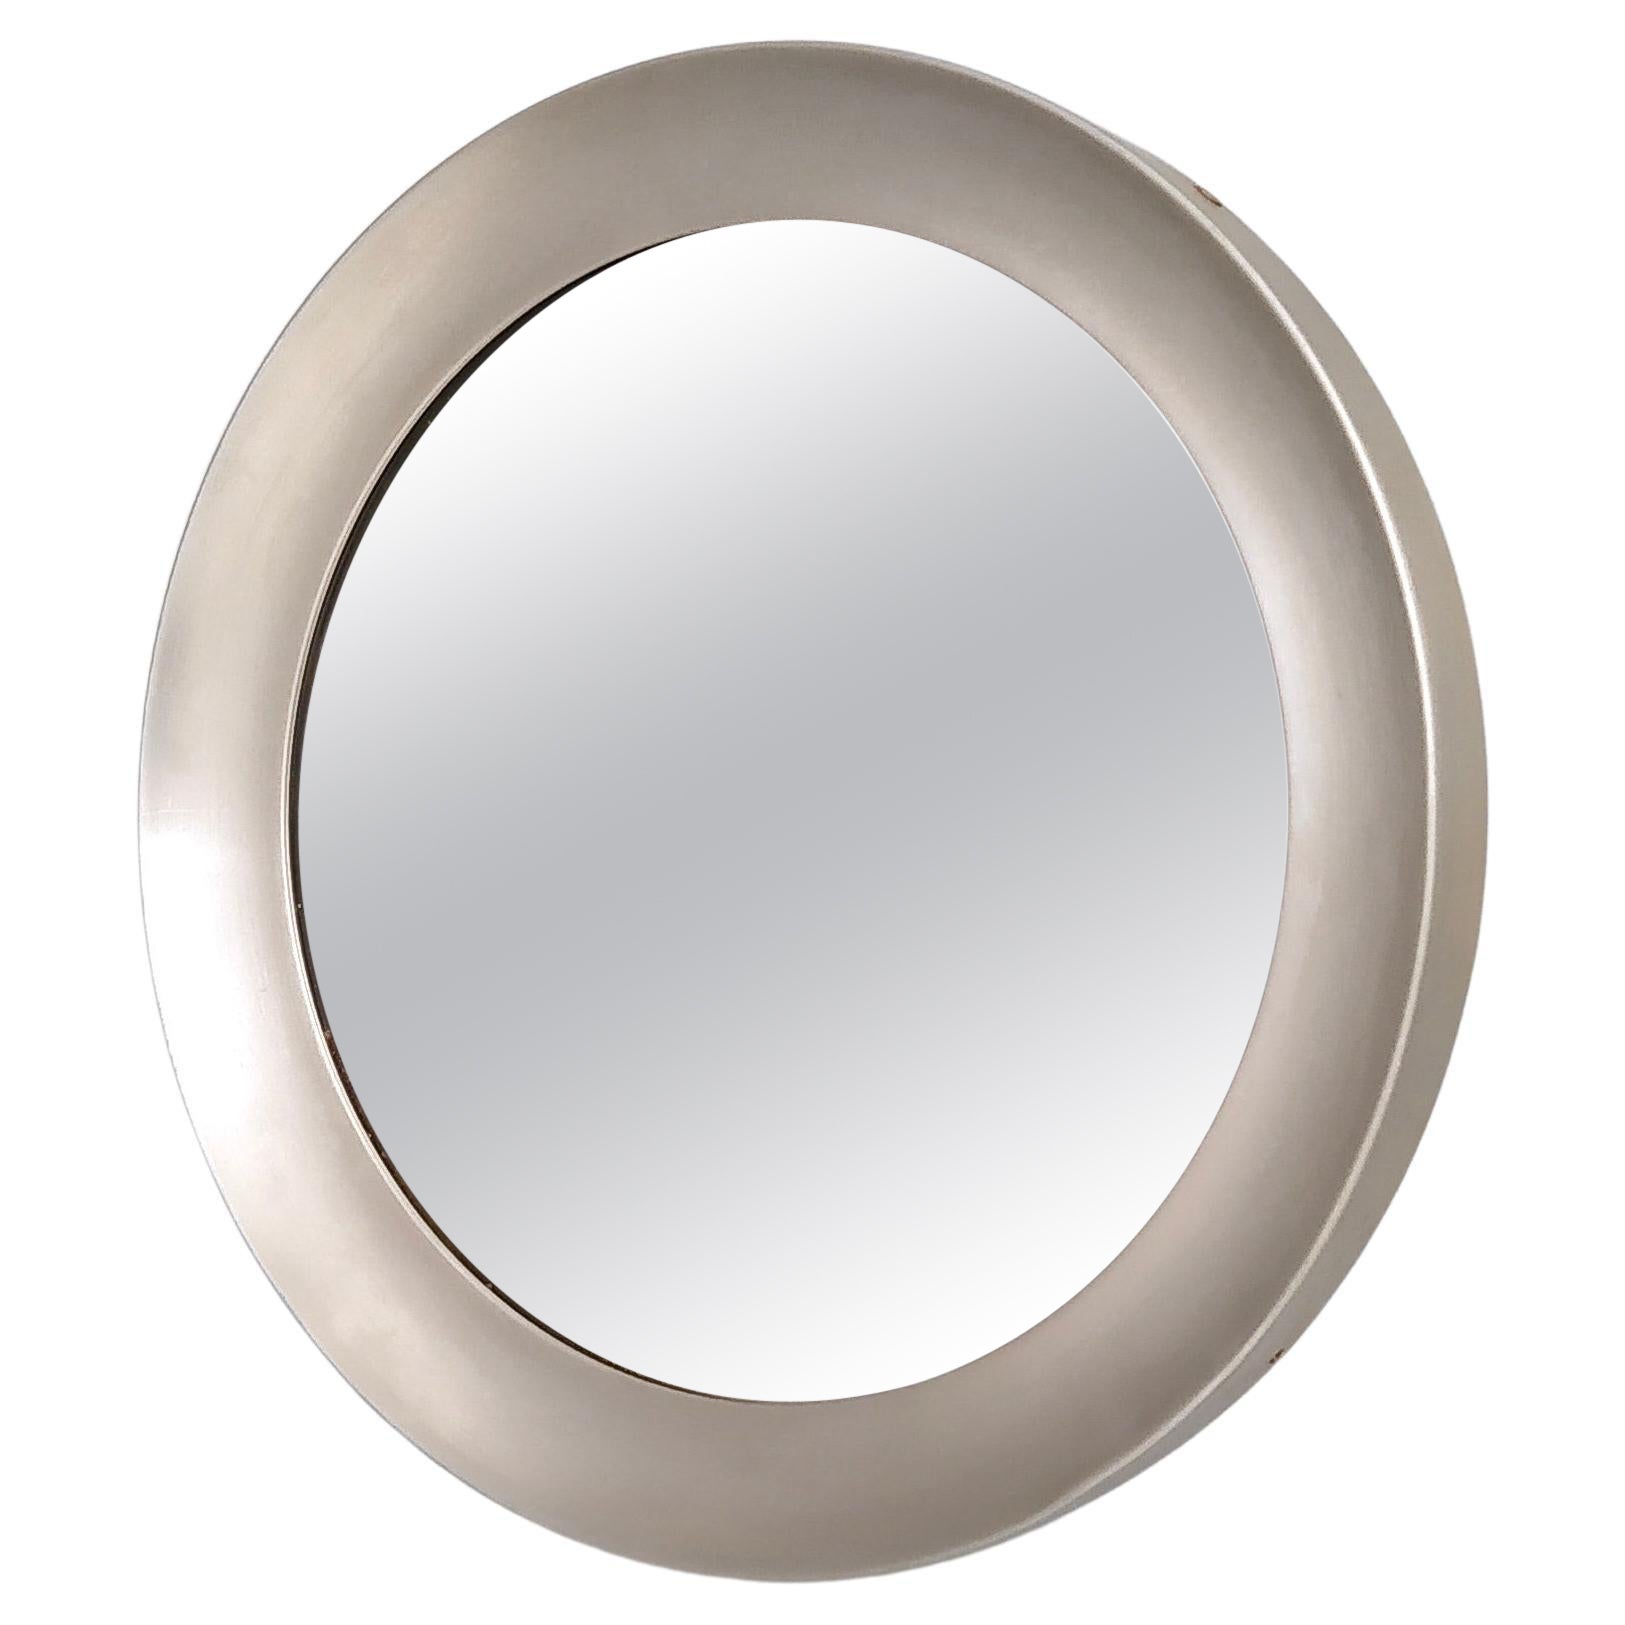 Vintage Round Narciso Mirror with Steel Frame by S. Mazza for Artemide, Italy For Sale